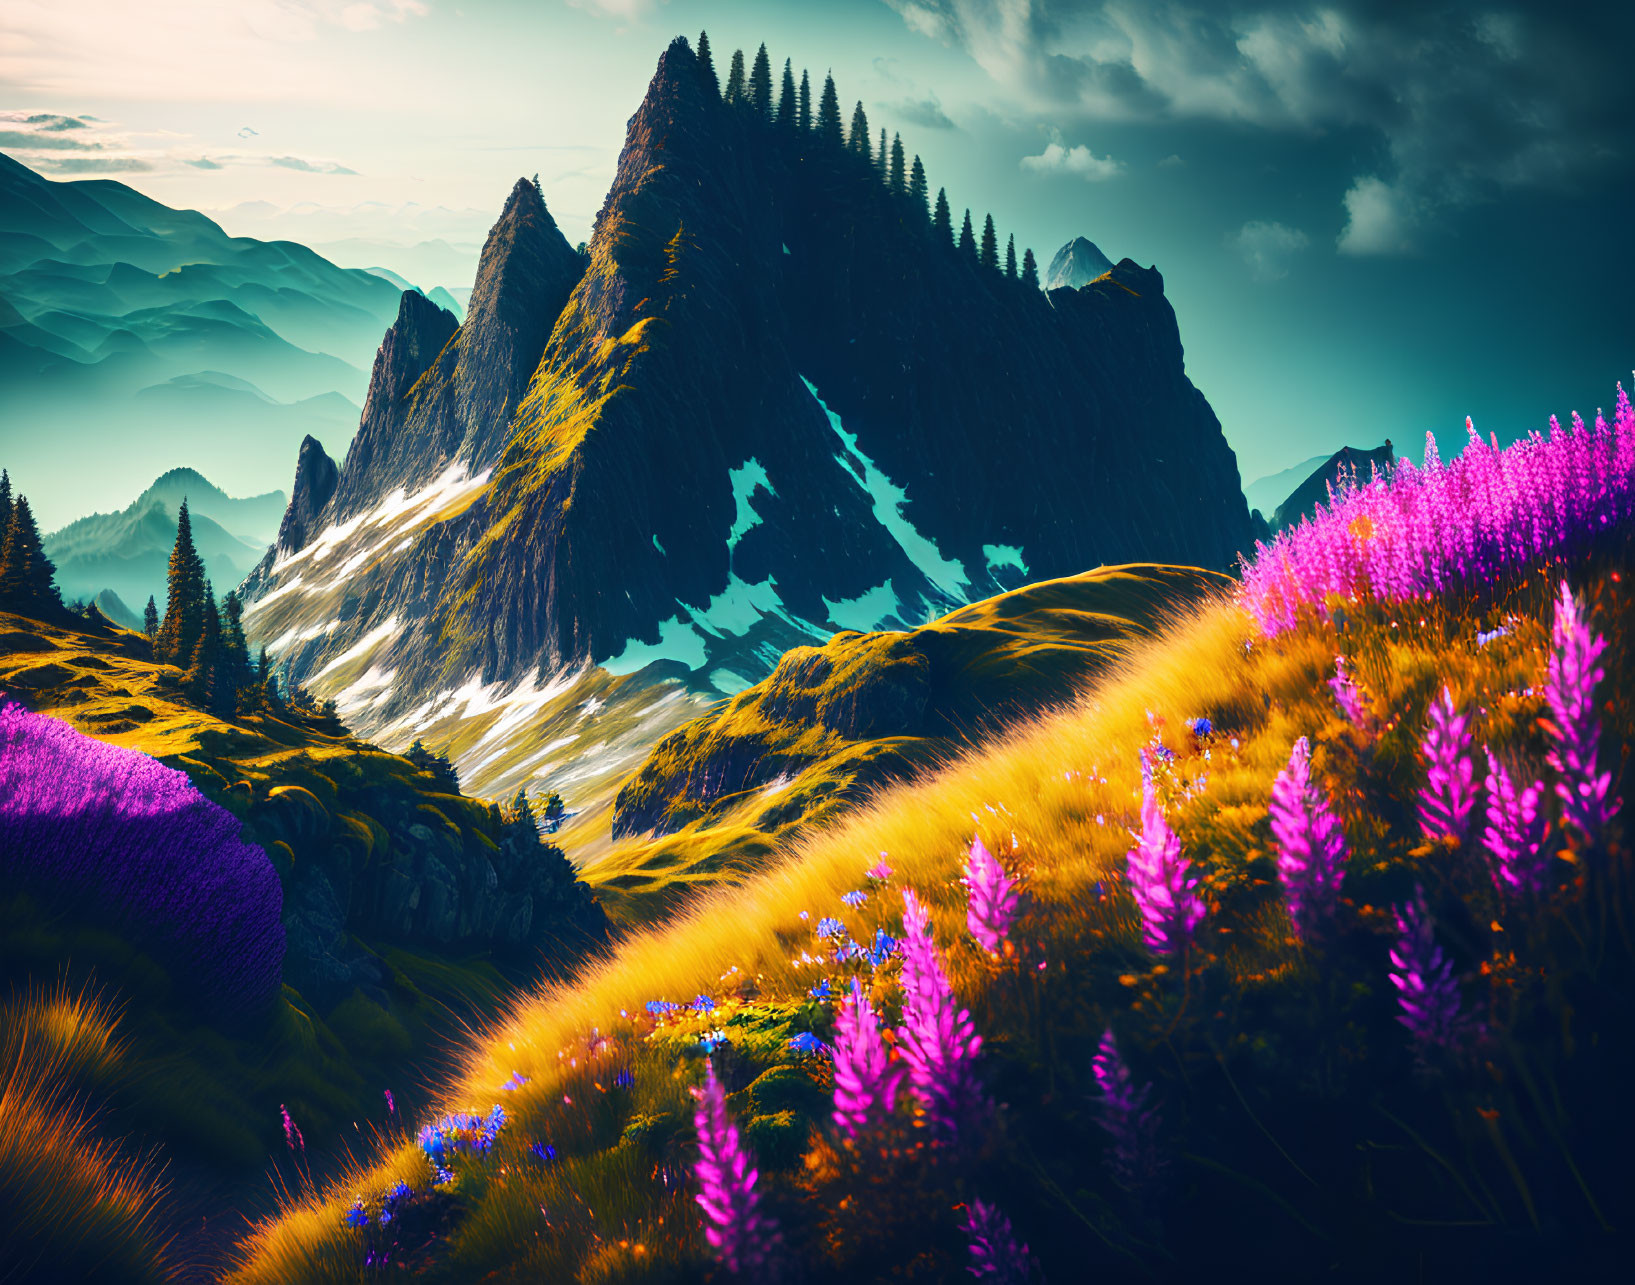 Scenic landscape with purple wildflowers, rolling hills, and jagged mountain peaks under a golden sky